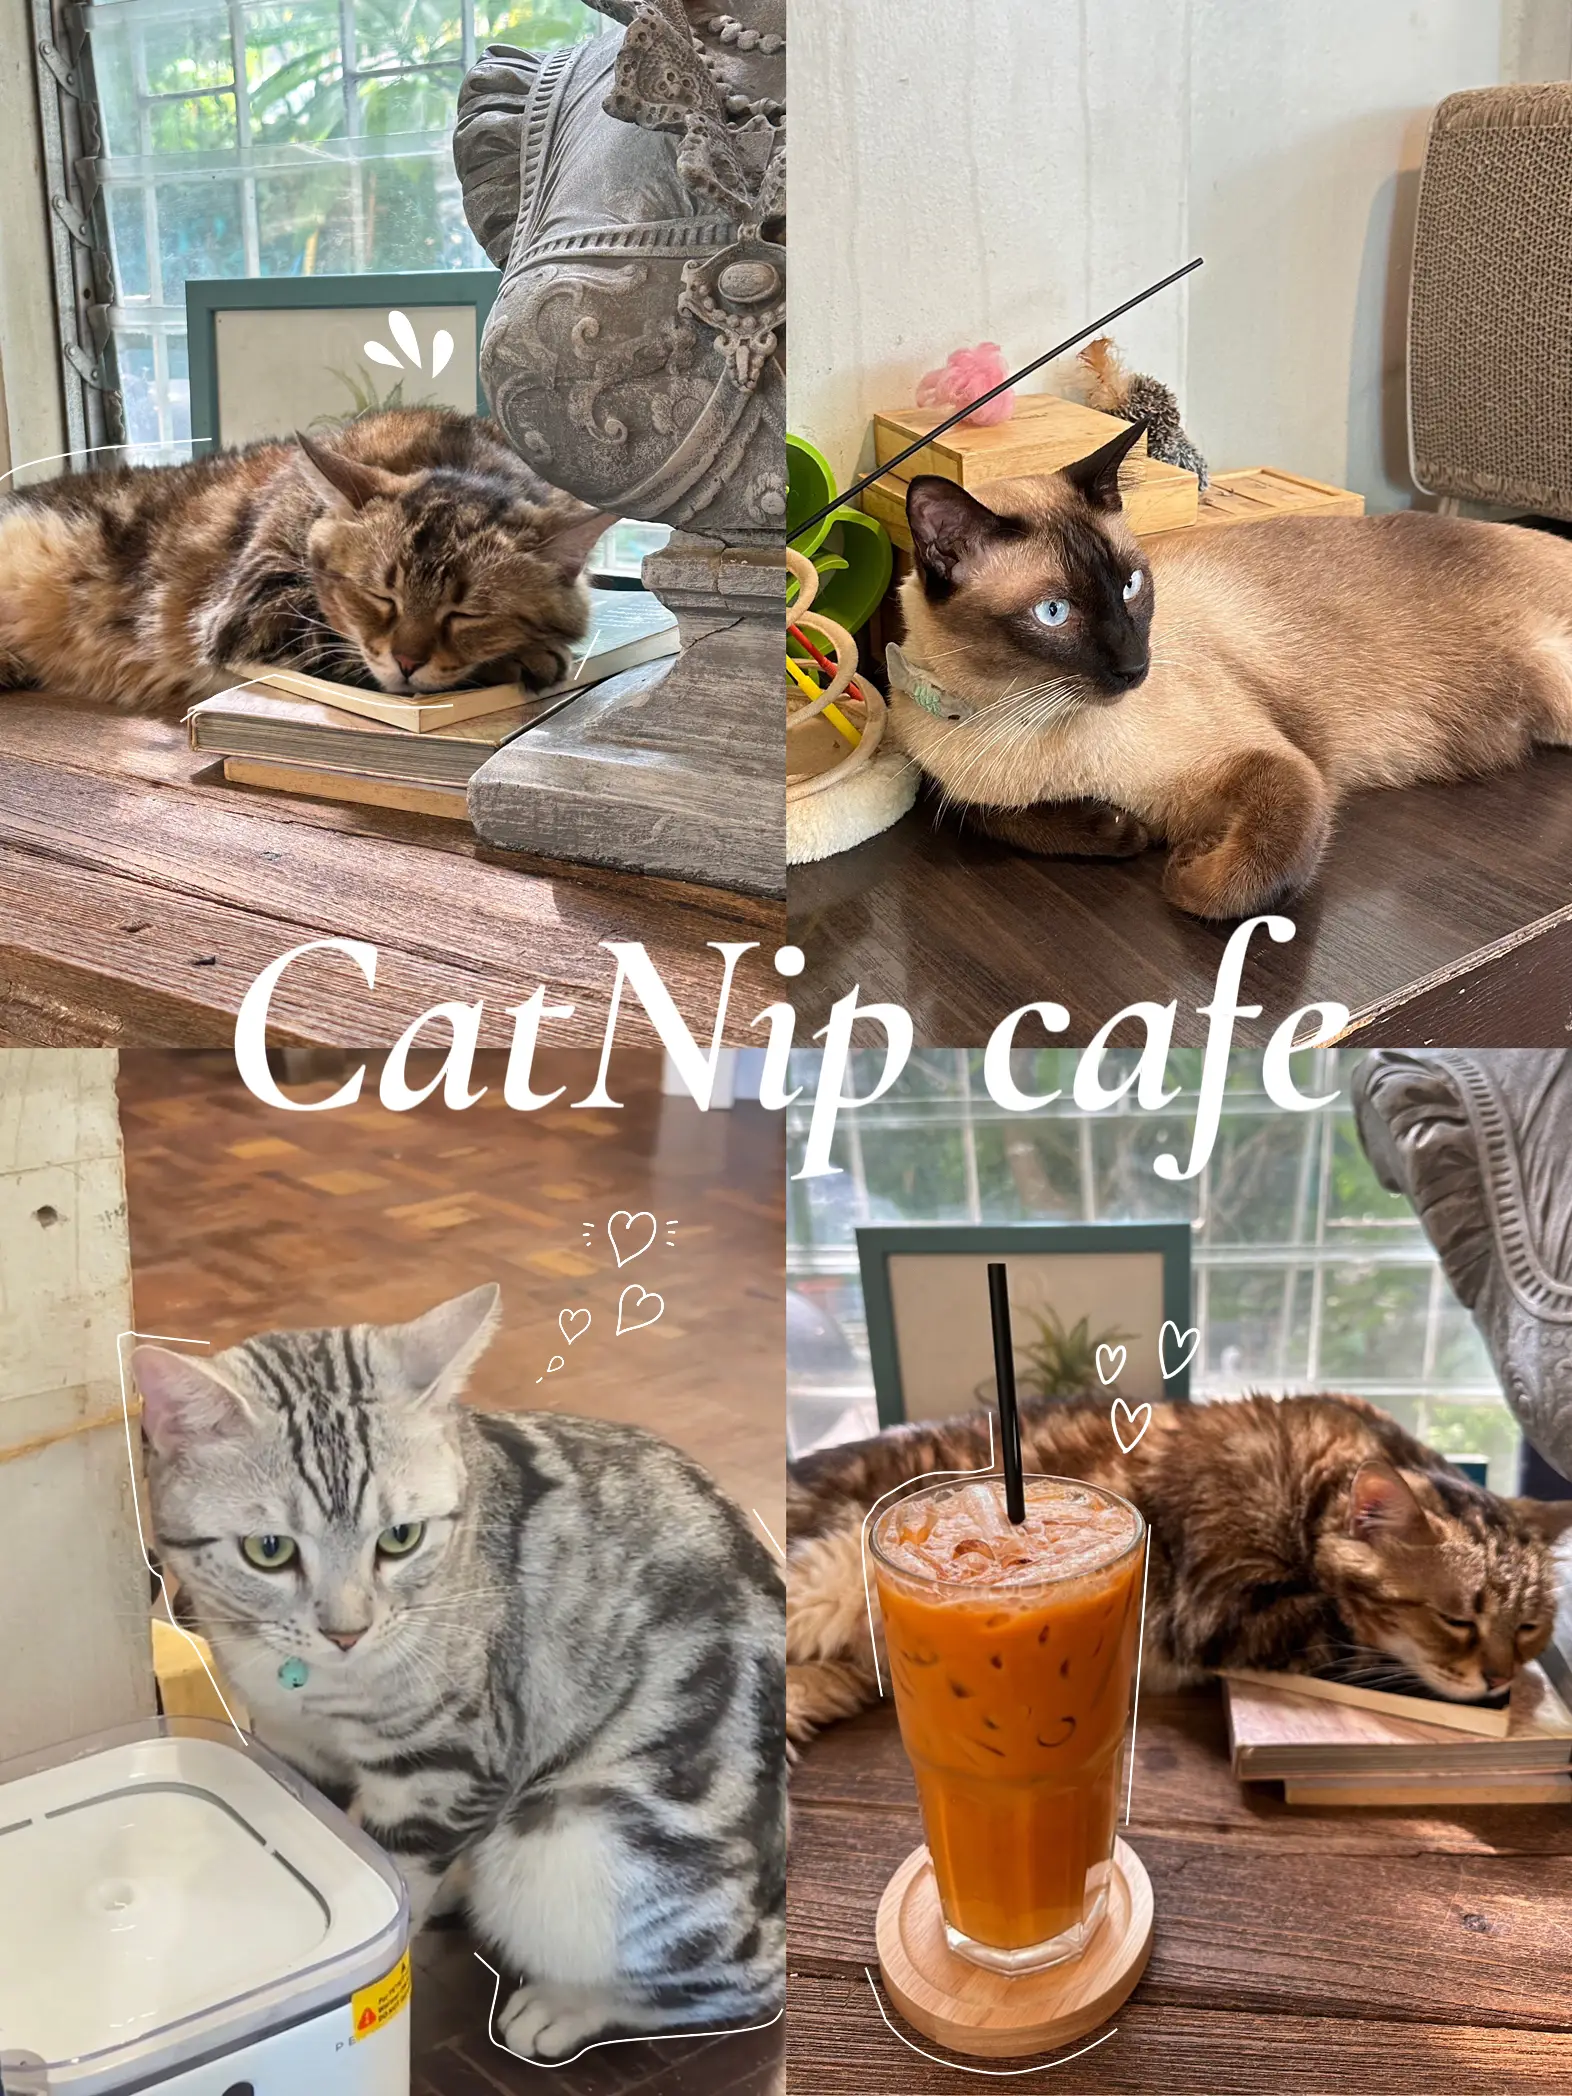 Cats Cafe by Tales of Paws ❤️, Gallery posted by Aierari